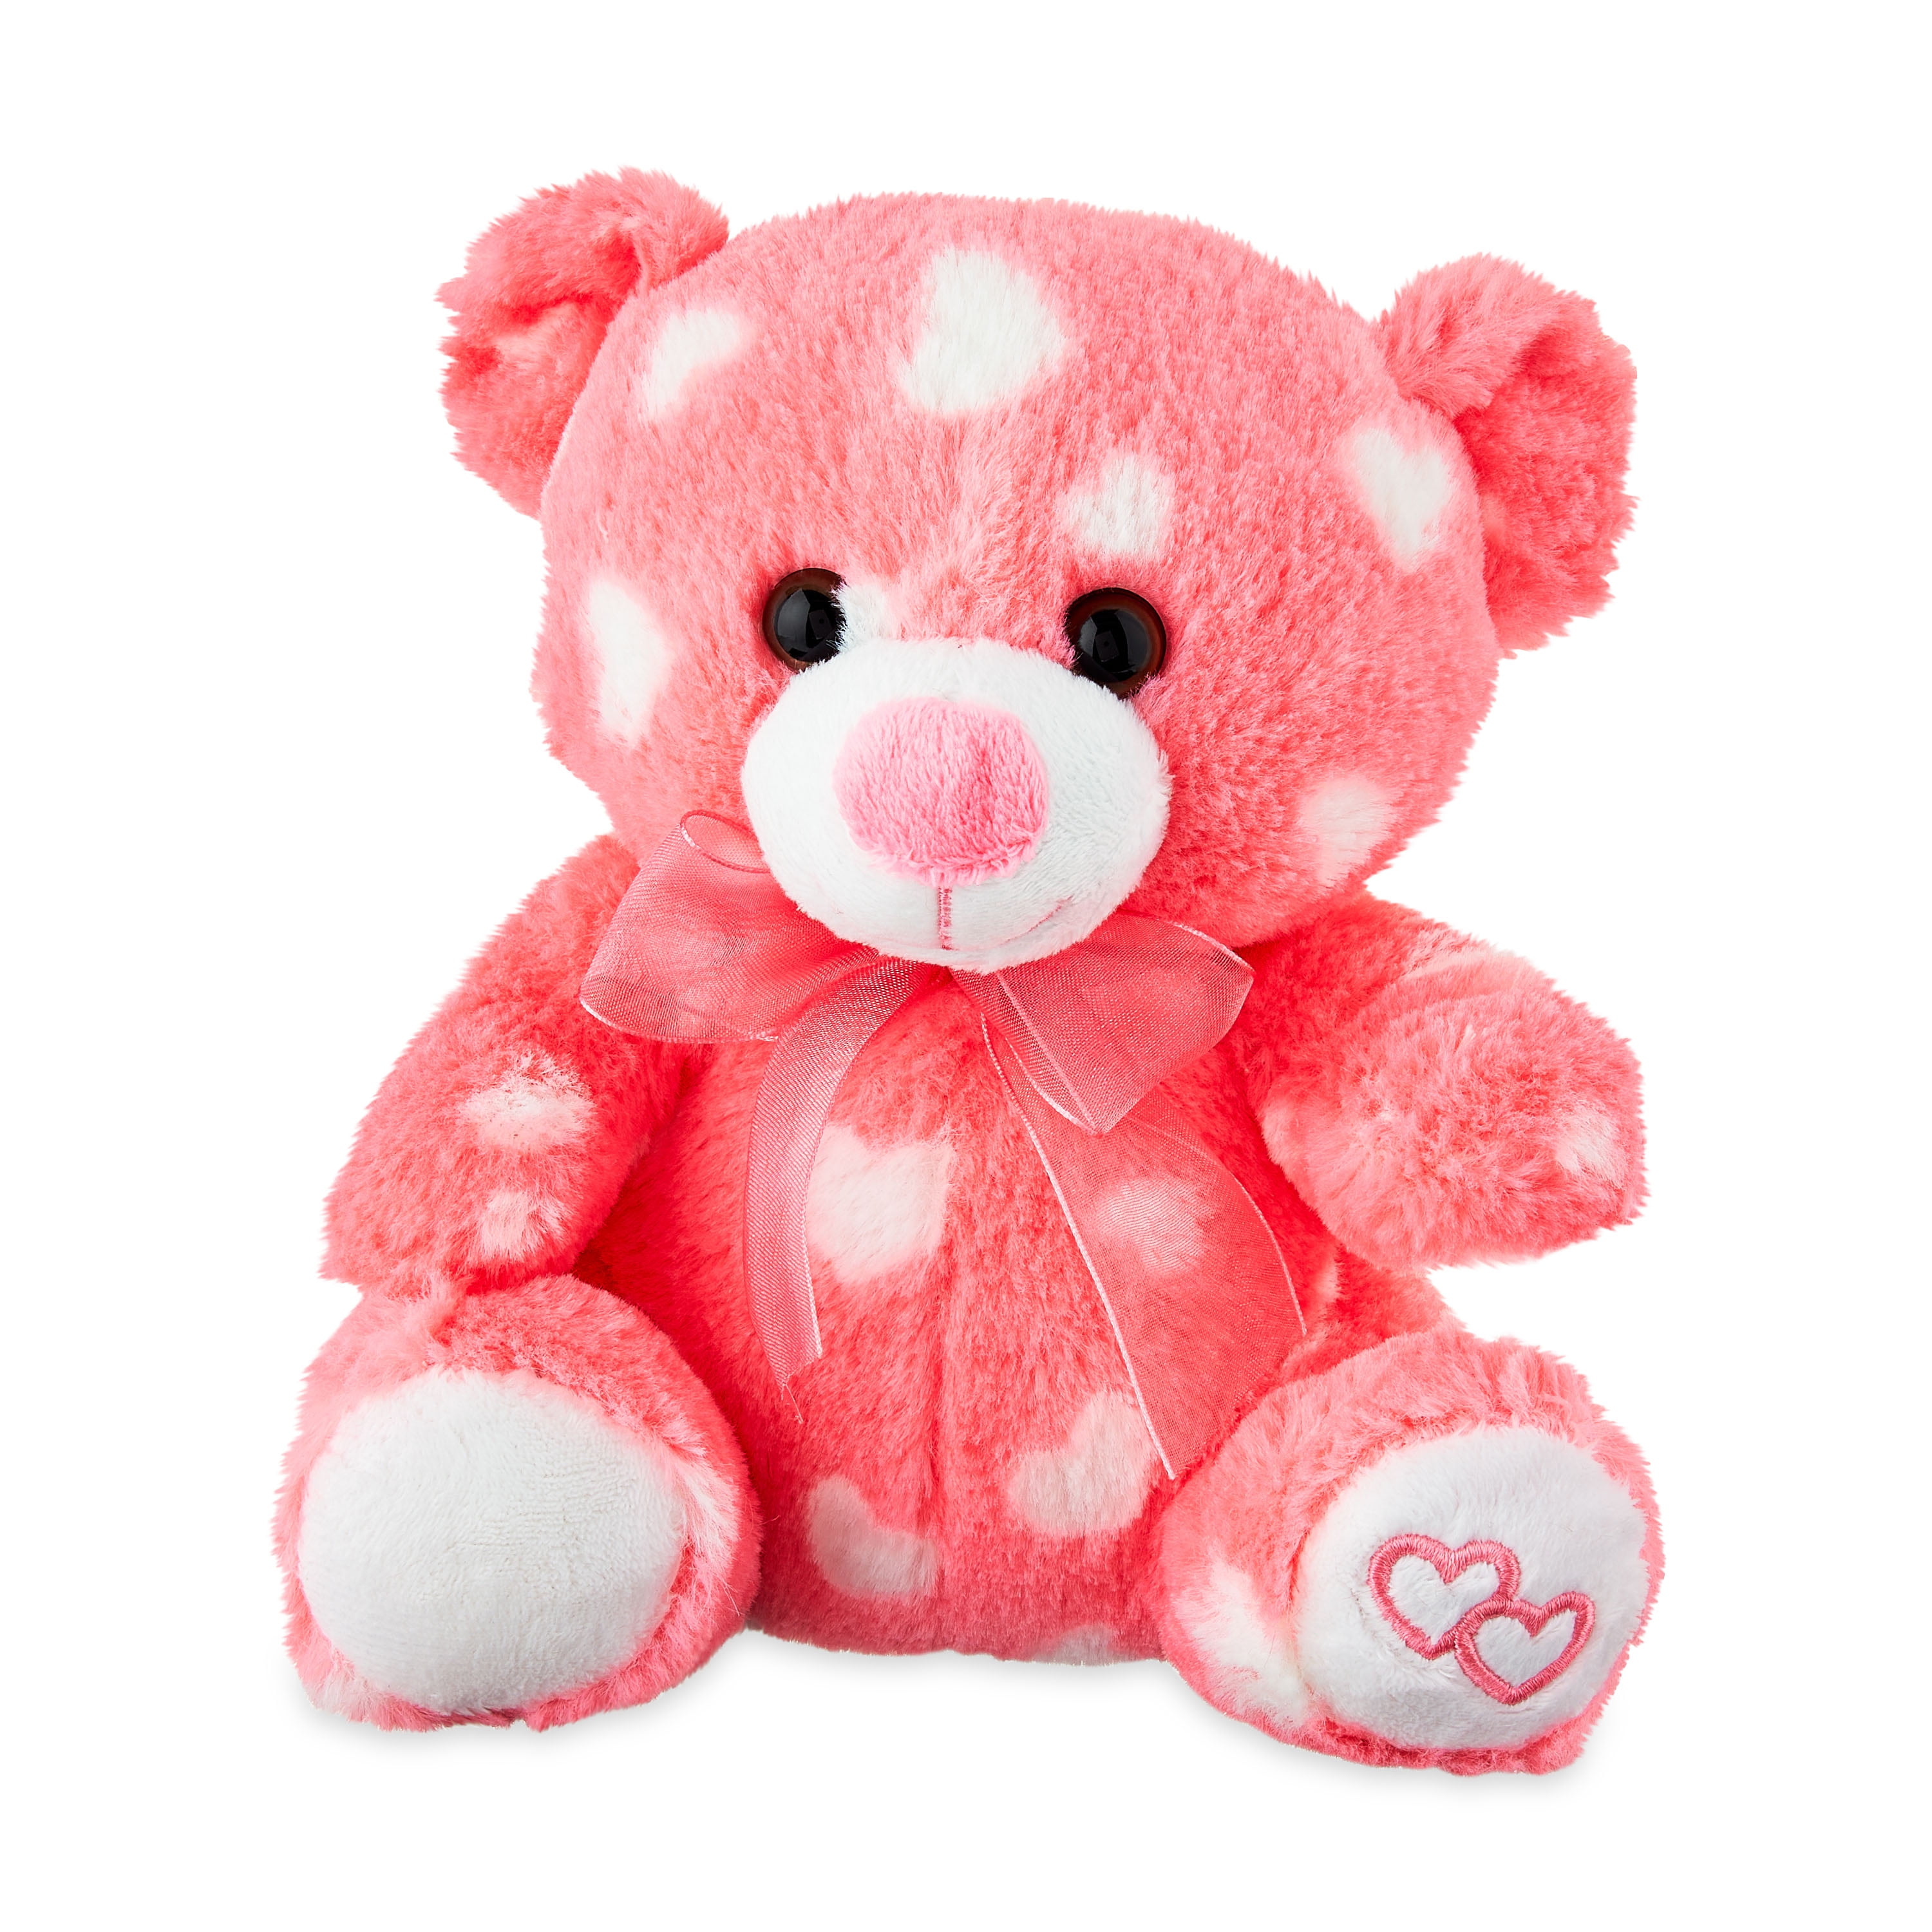 Way to Celebrate! Valentine’s Day 8in Soft Expression Plush Teddy Bear, Light Pink with Hearts